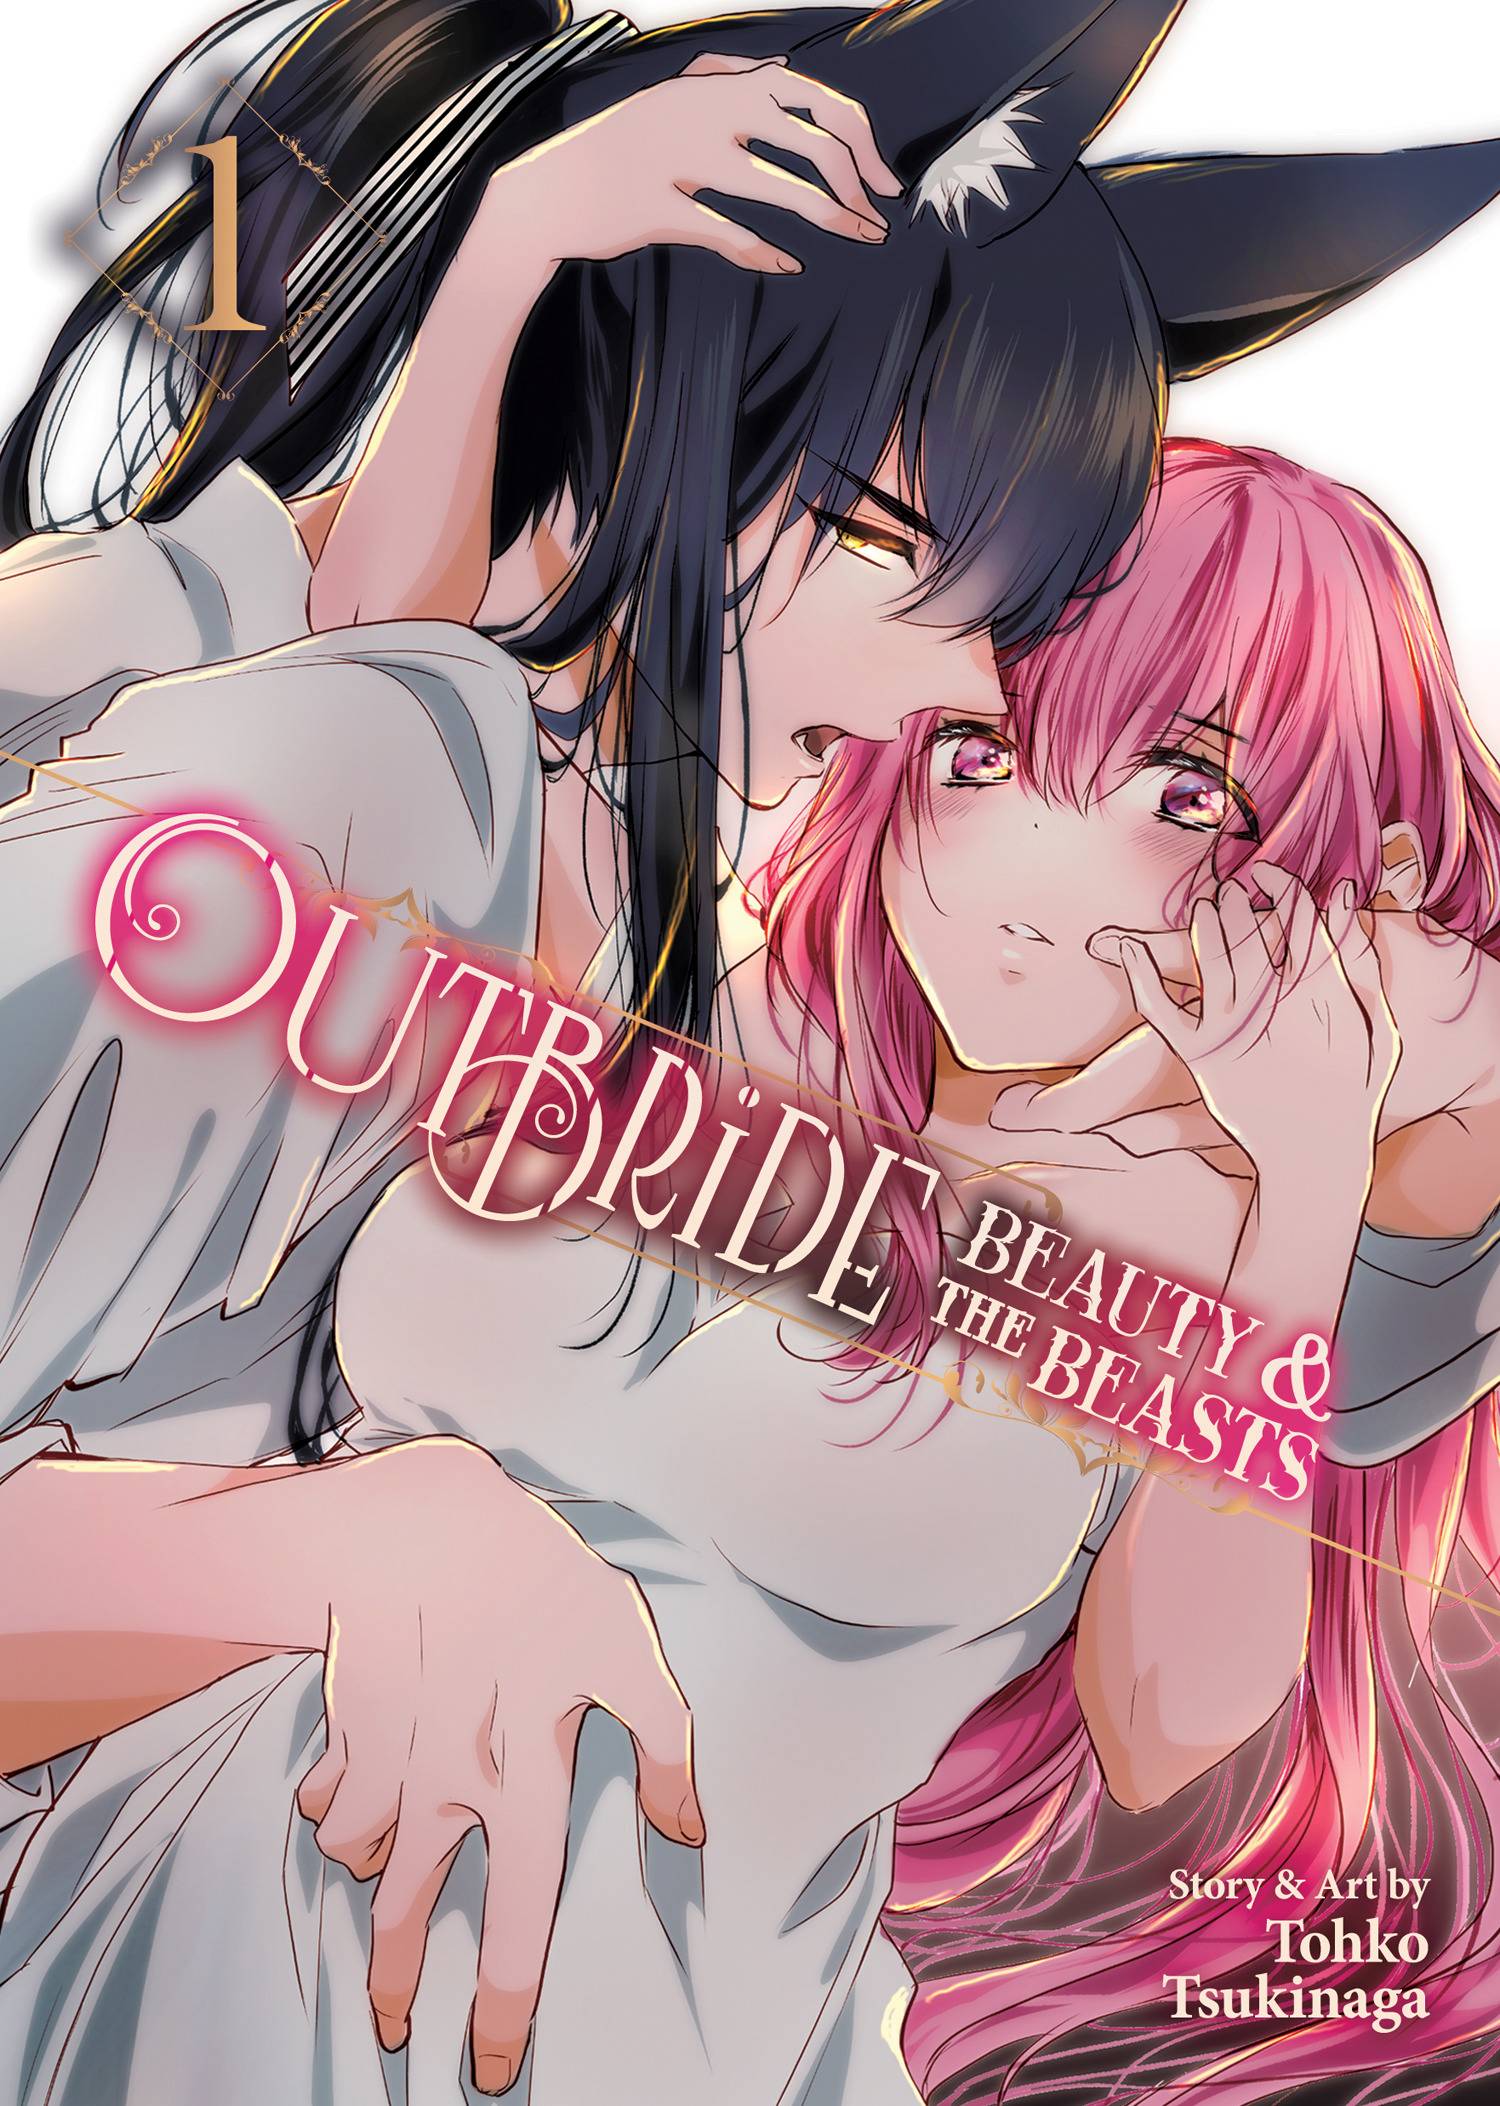 Outbride: Beauty and Beasts Volume 1 GN